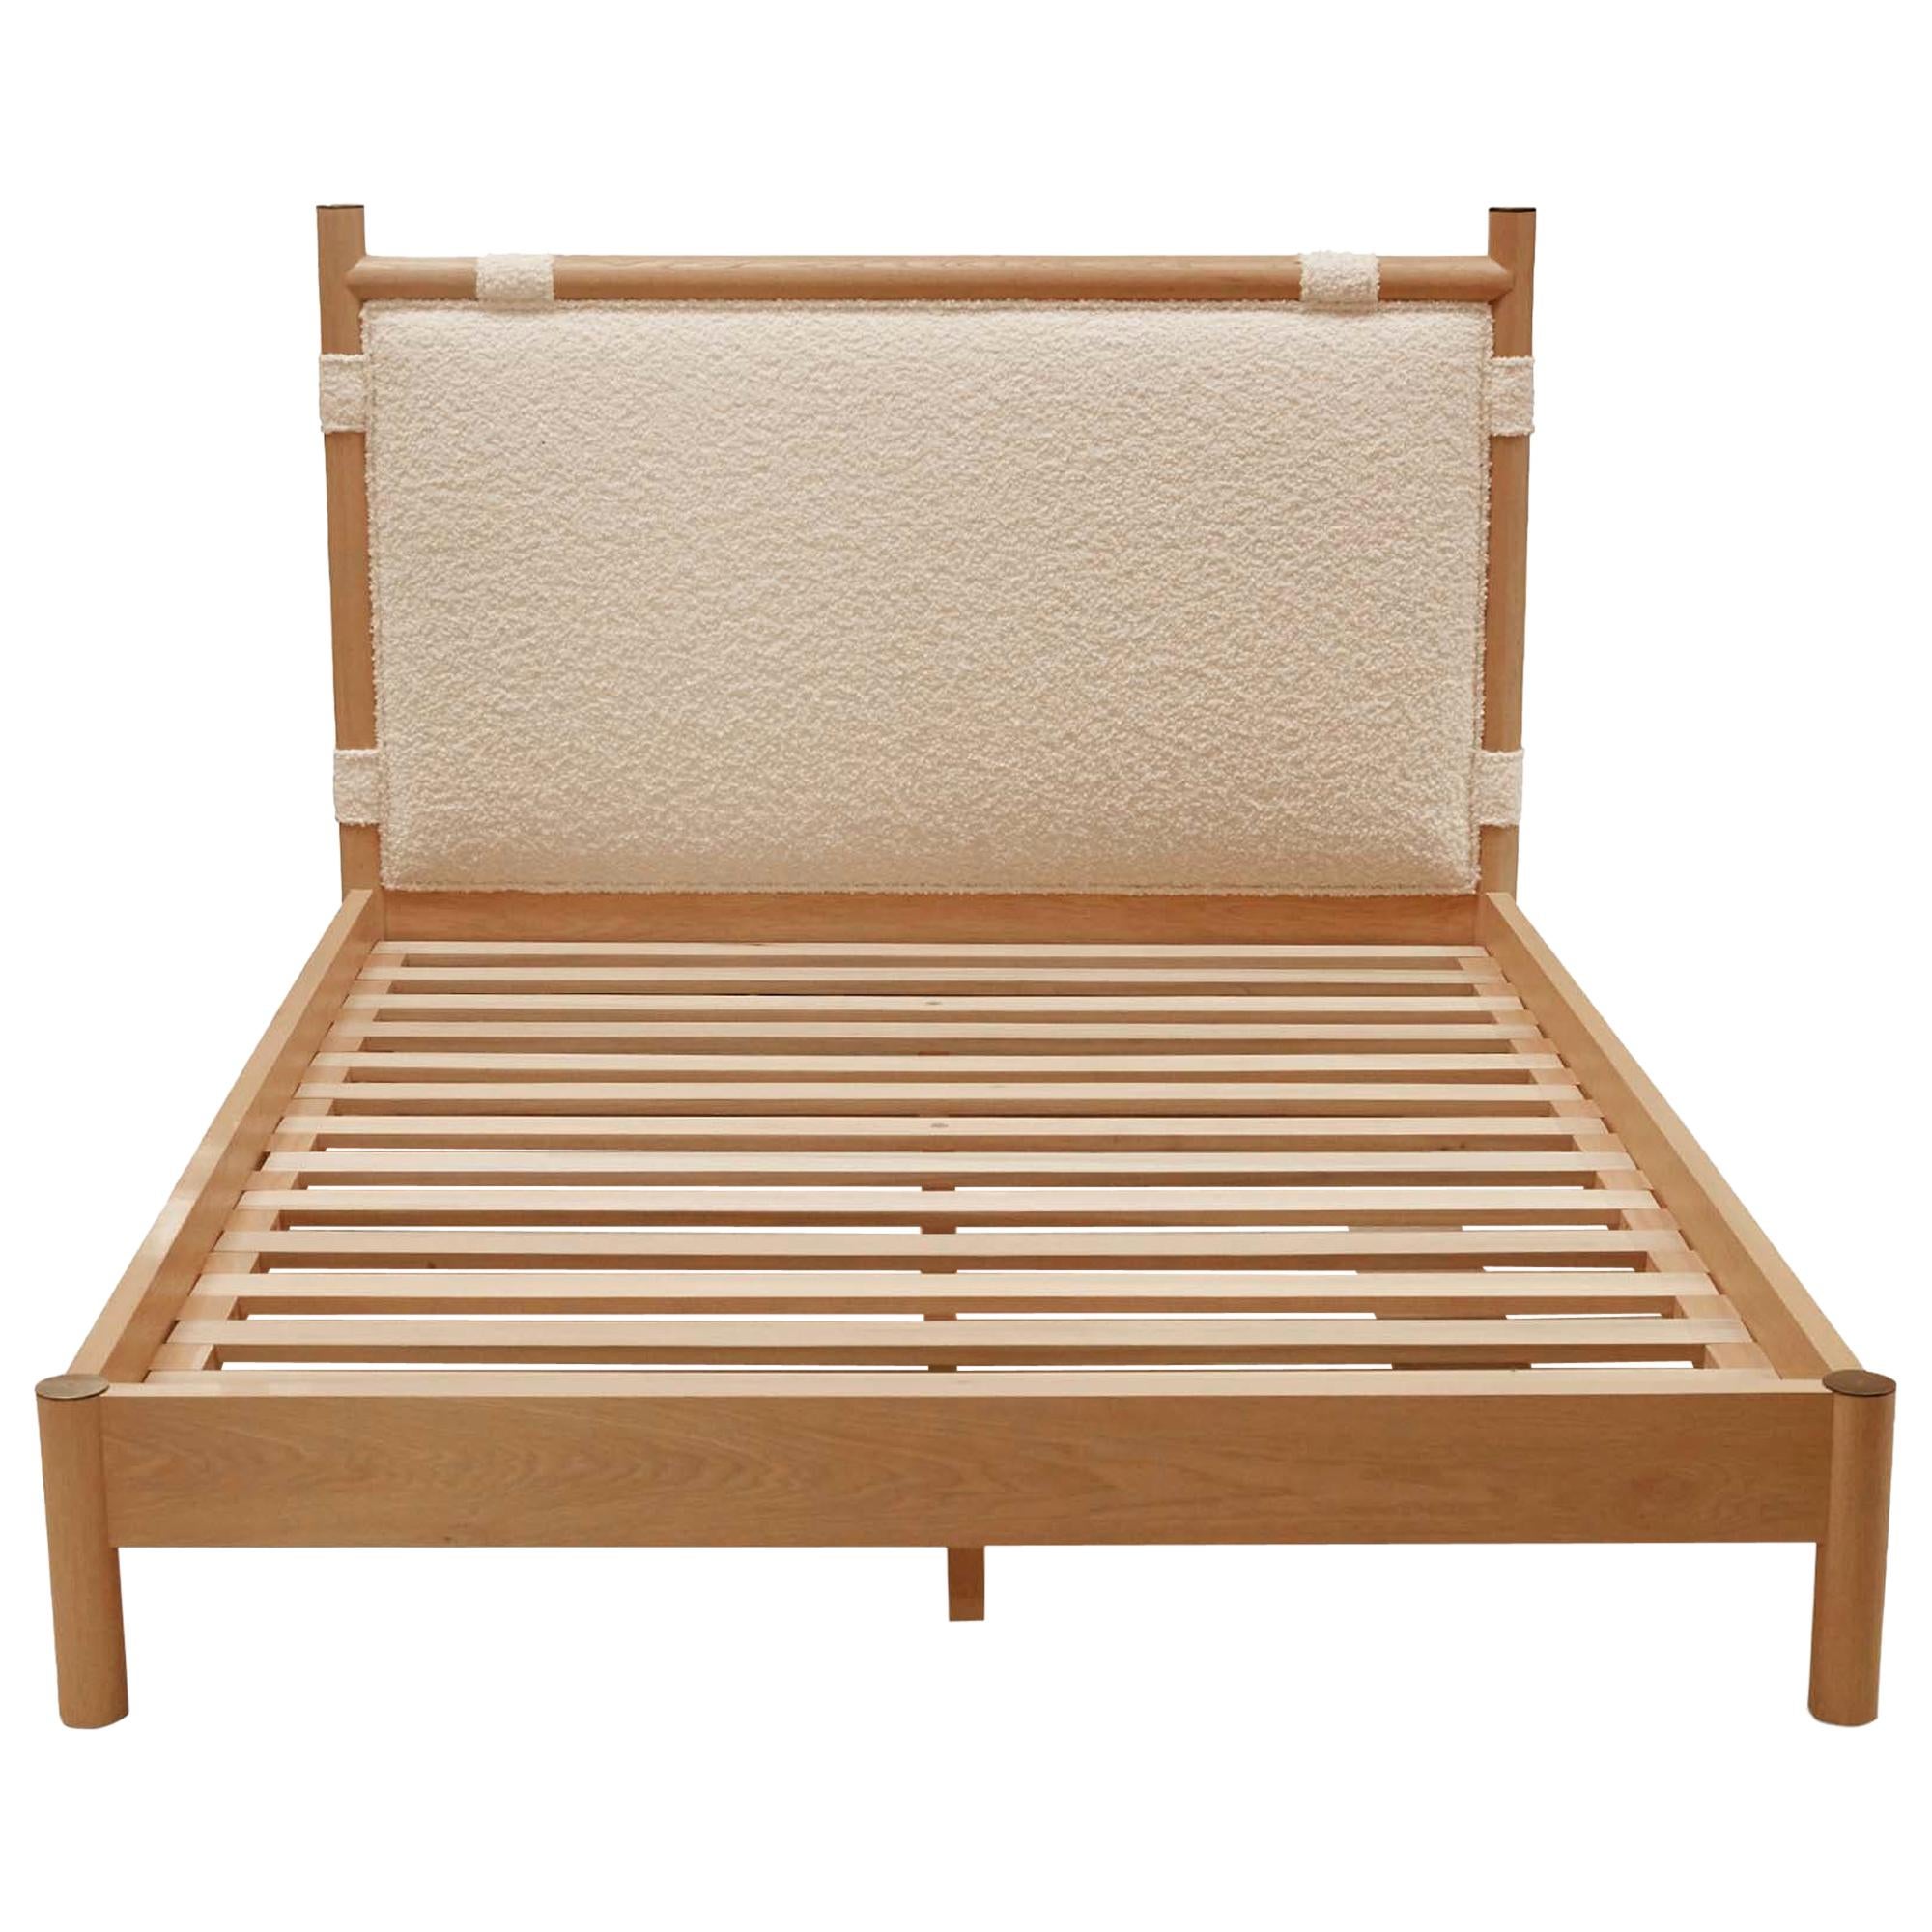 Chiselhurst Bed No Footboard, Can You Use A Headboard Without Footboard